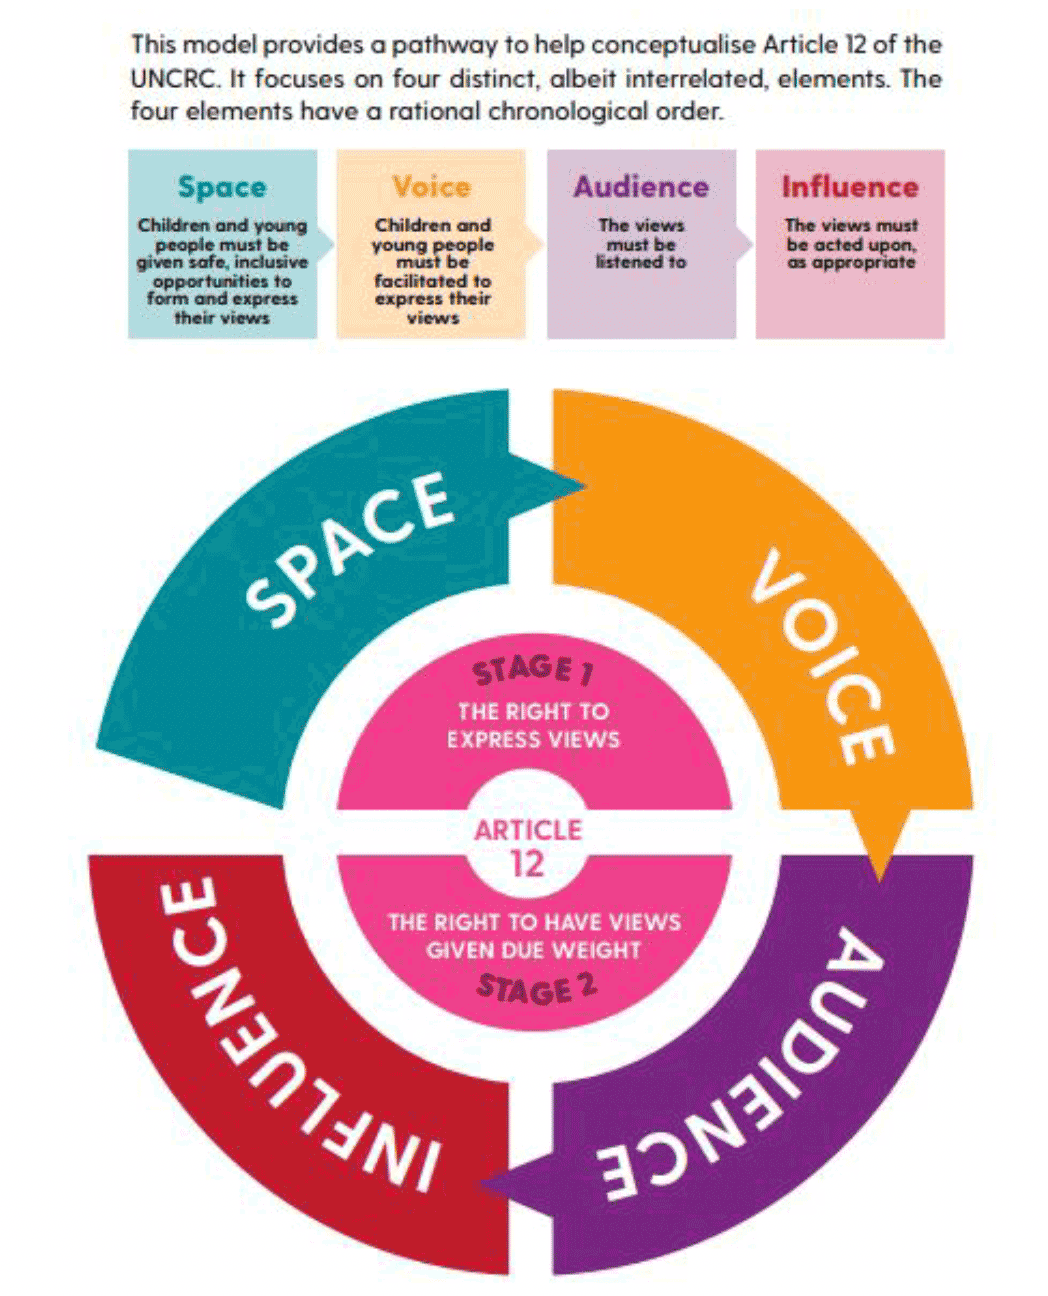 This model provides a pathway to help conceptualise Article 12 of the UNCRC. It focusses on four distinct, albeit interrelated, elements. The four elements have a rational chronological order. Space - Children and young people must be given safe, inclusive opportunities to form and express their views. Voice - Children and young people must be facilitated to express their views. Audience - The views must be listened to. Influence - The views must be acted upon, as appropriate